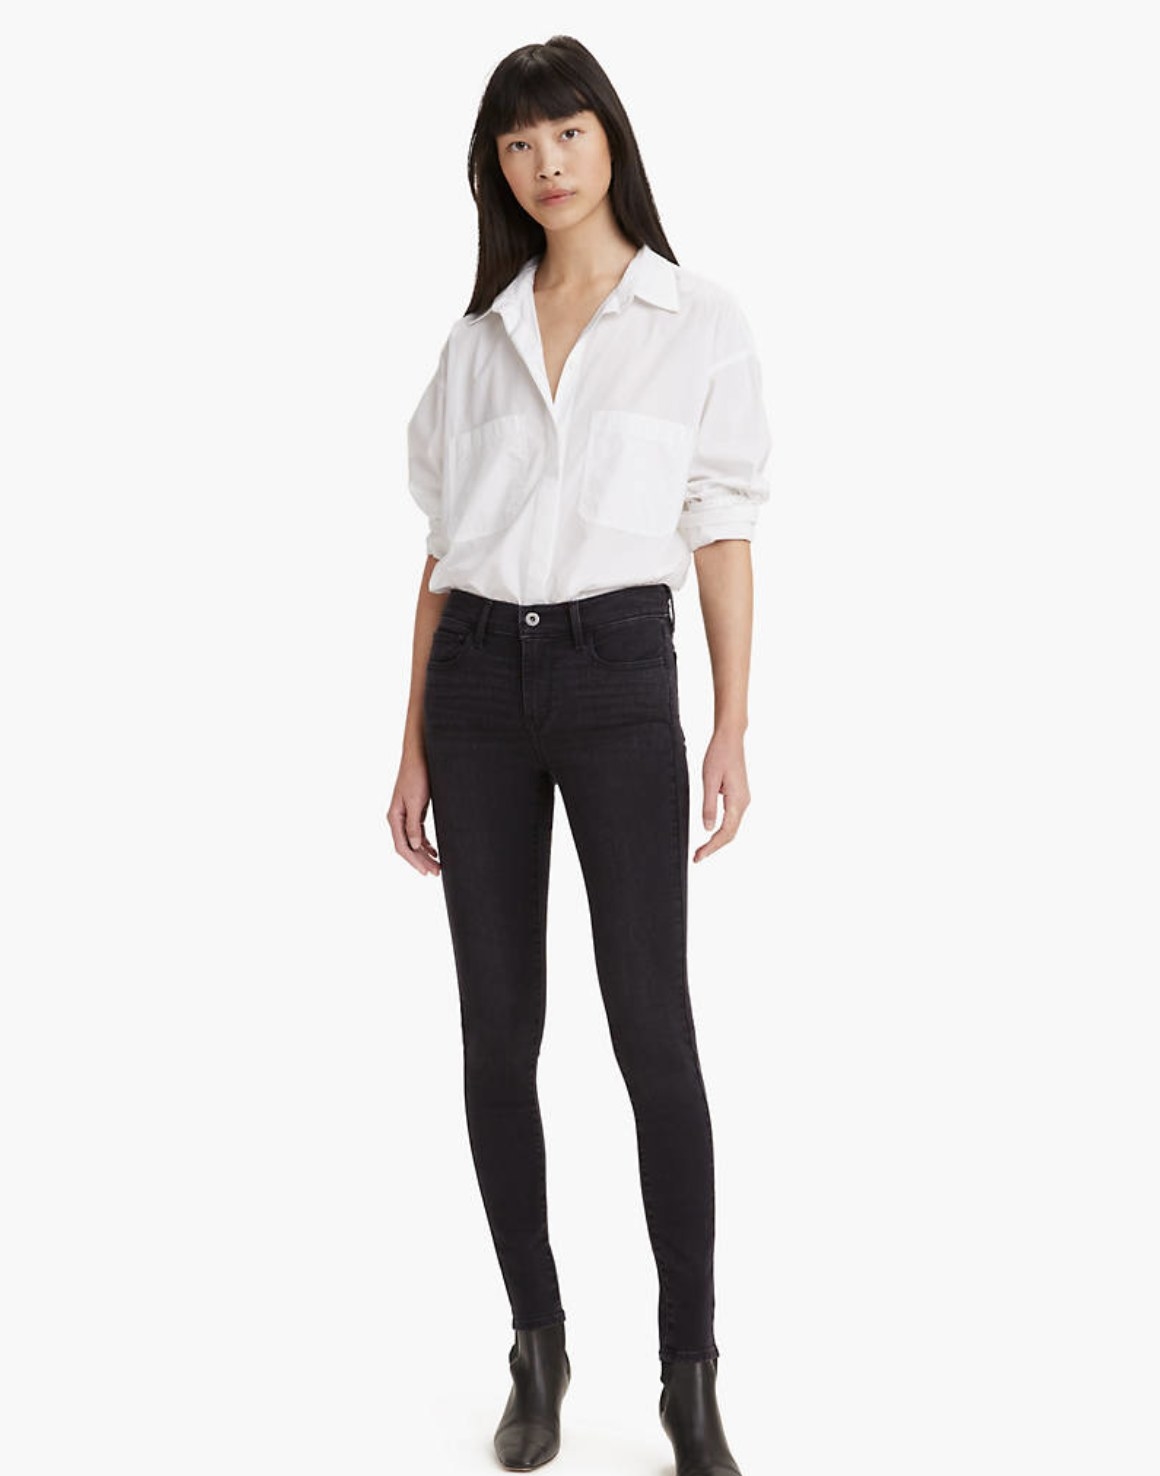 Model is wearing a white top and black denim skinny jeans